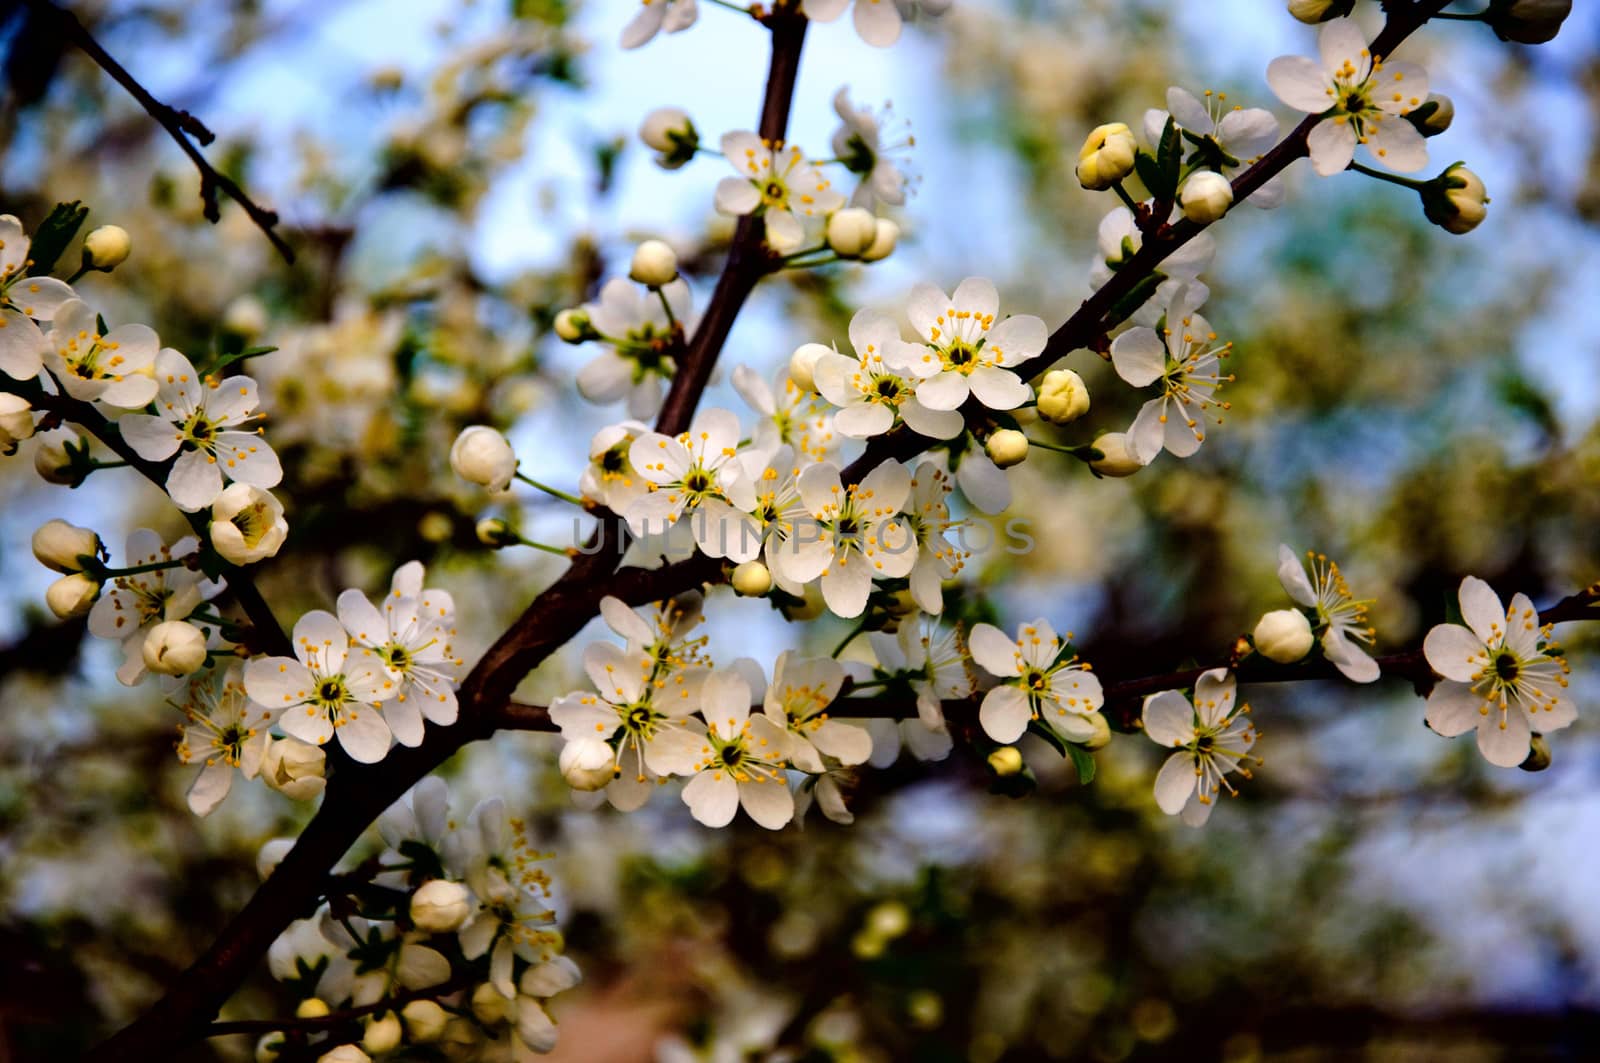 Blossoming apple tree with white flowers on blue sky background close-up, Sergiev Posad, Moscow region, Russia